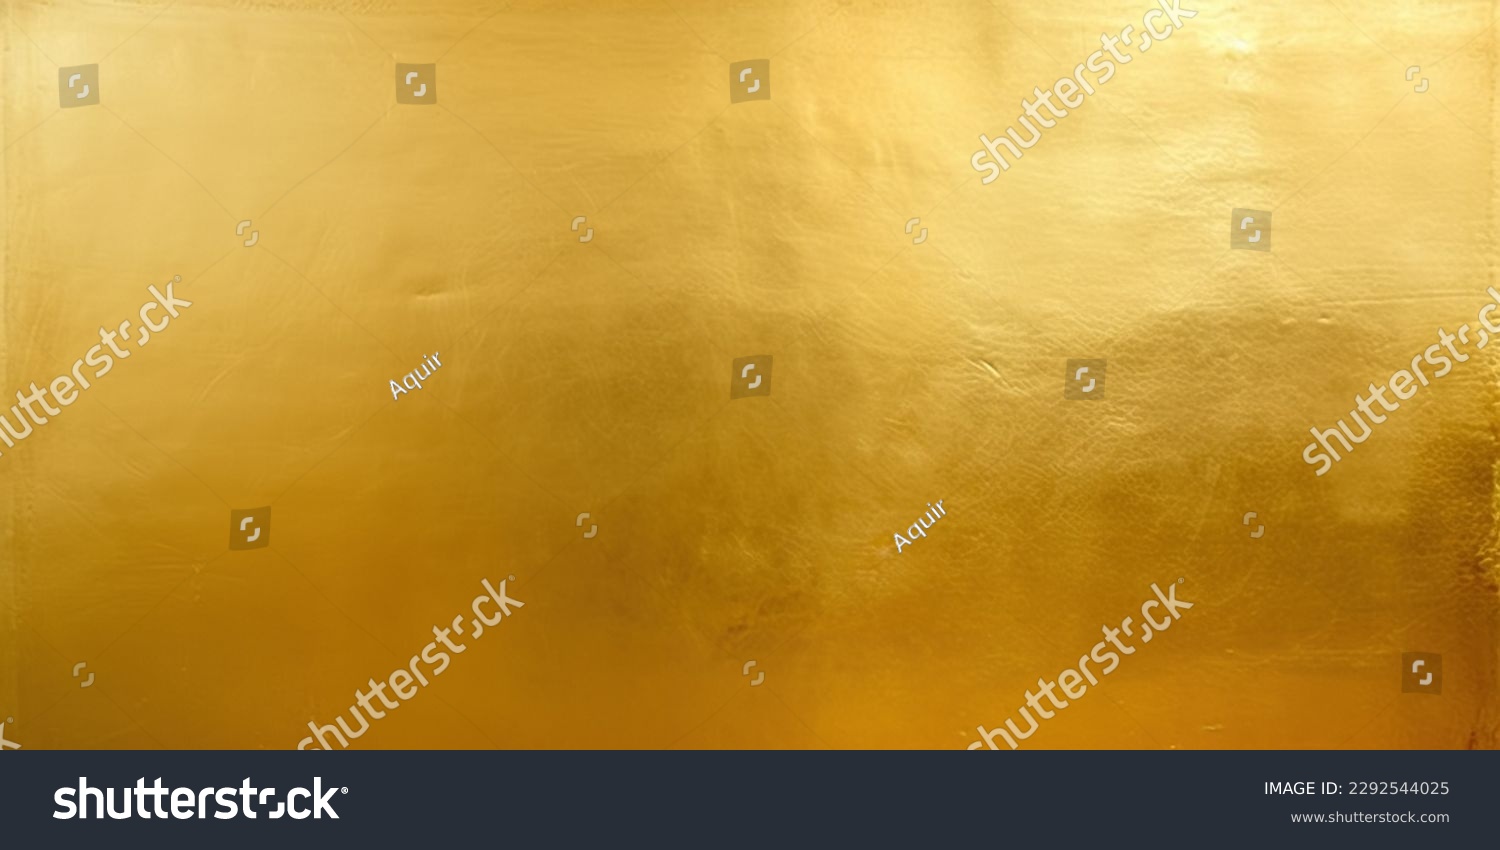 Gold texture. Golden background. Beatiful luxury and elegant gold background. Shiny golden wall texture #2292544025